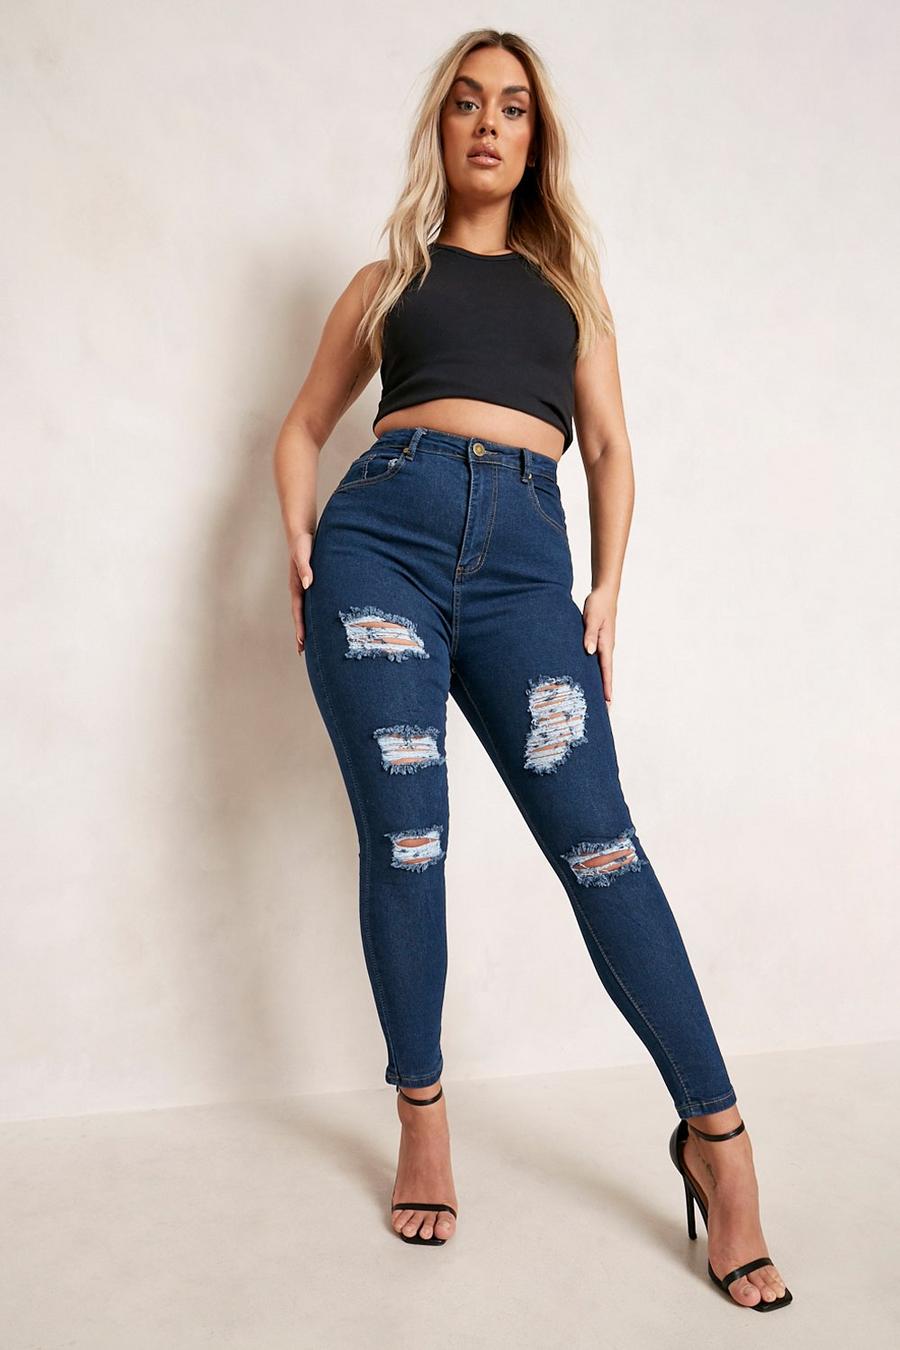 Pencil Jeans Plus Size Women's Mid Waist Ripped Fringed Jeans